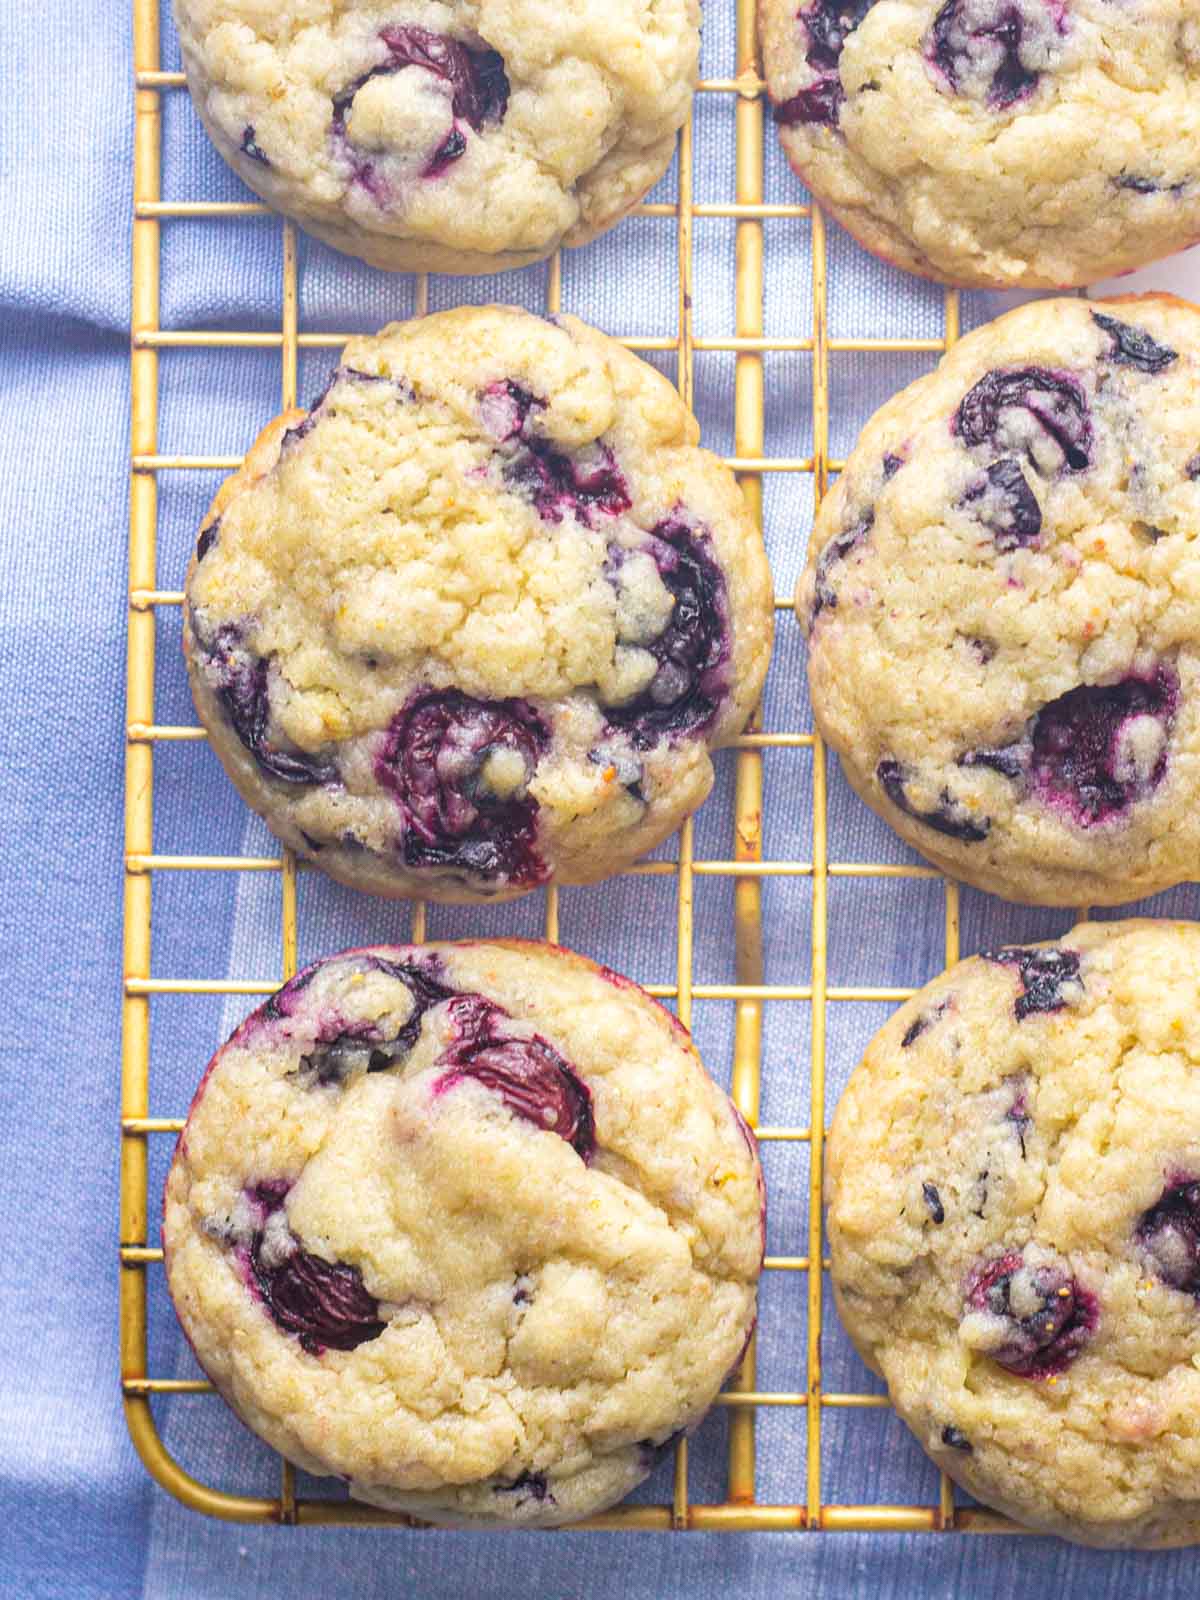 Blueberry cookies on the corner of a gold wire rack on top of a blue linen.